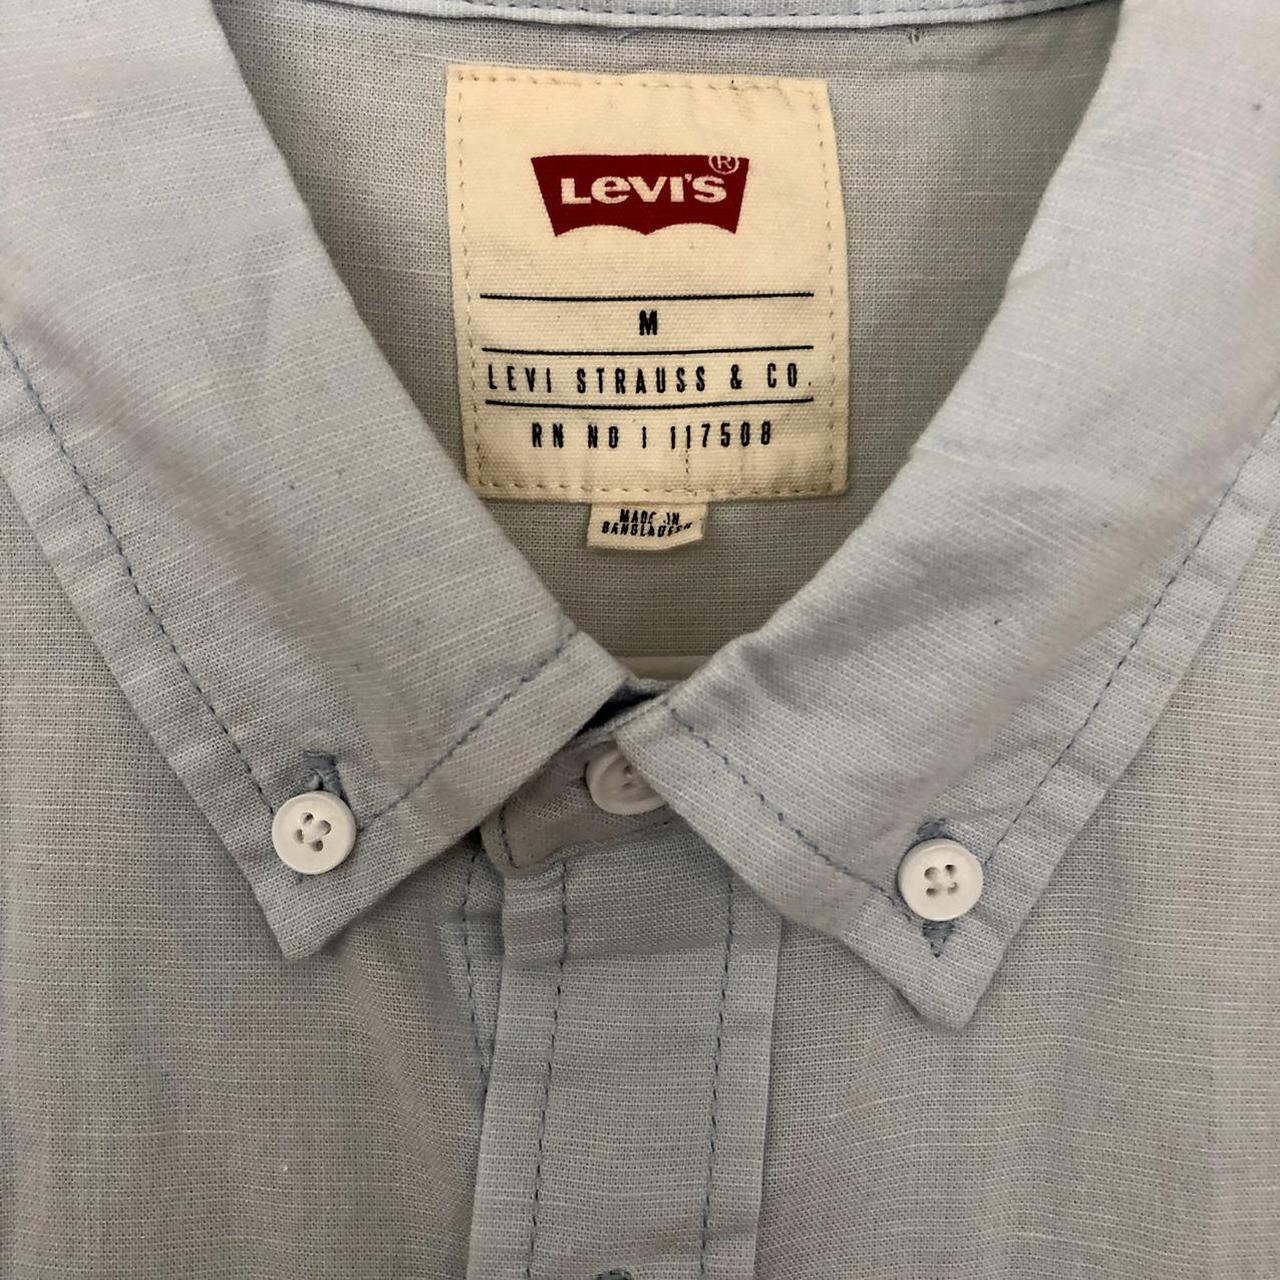 Product Image 3 - NWT Men's chambray Levi's button